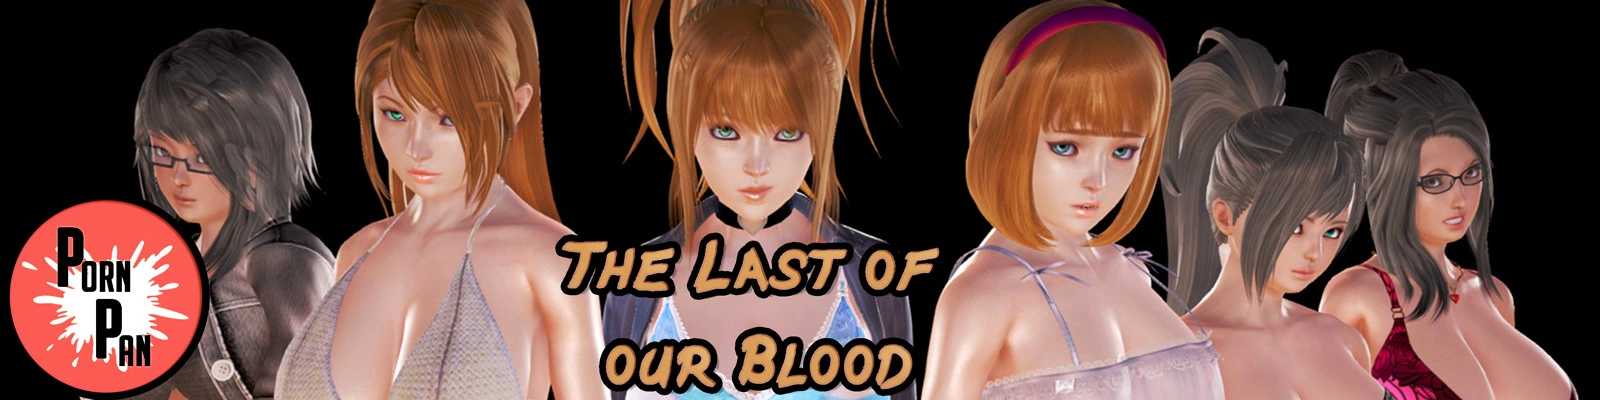 The Last of our Blood [v0.3] main image